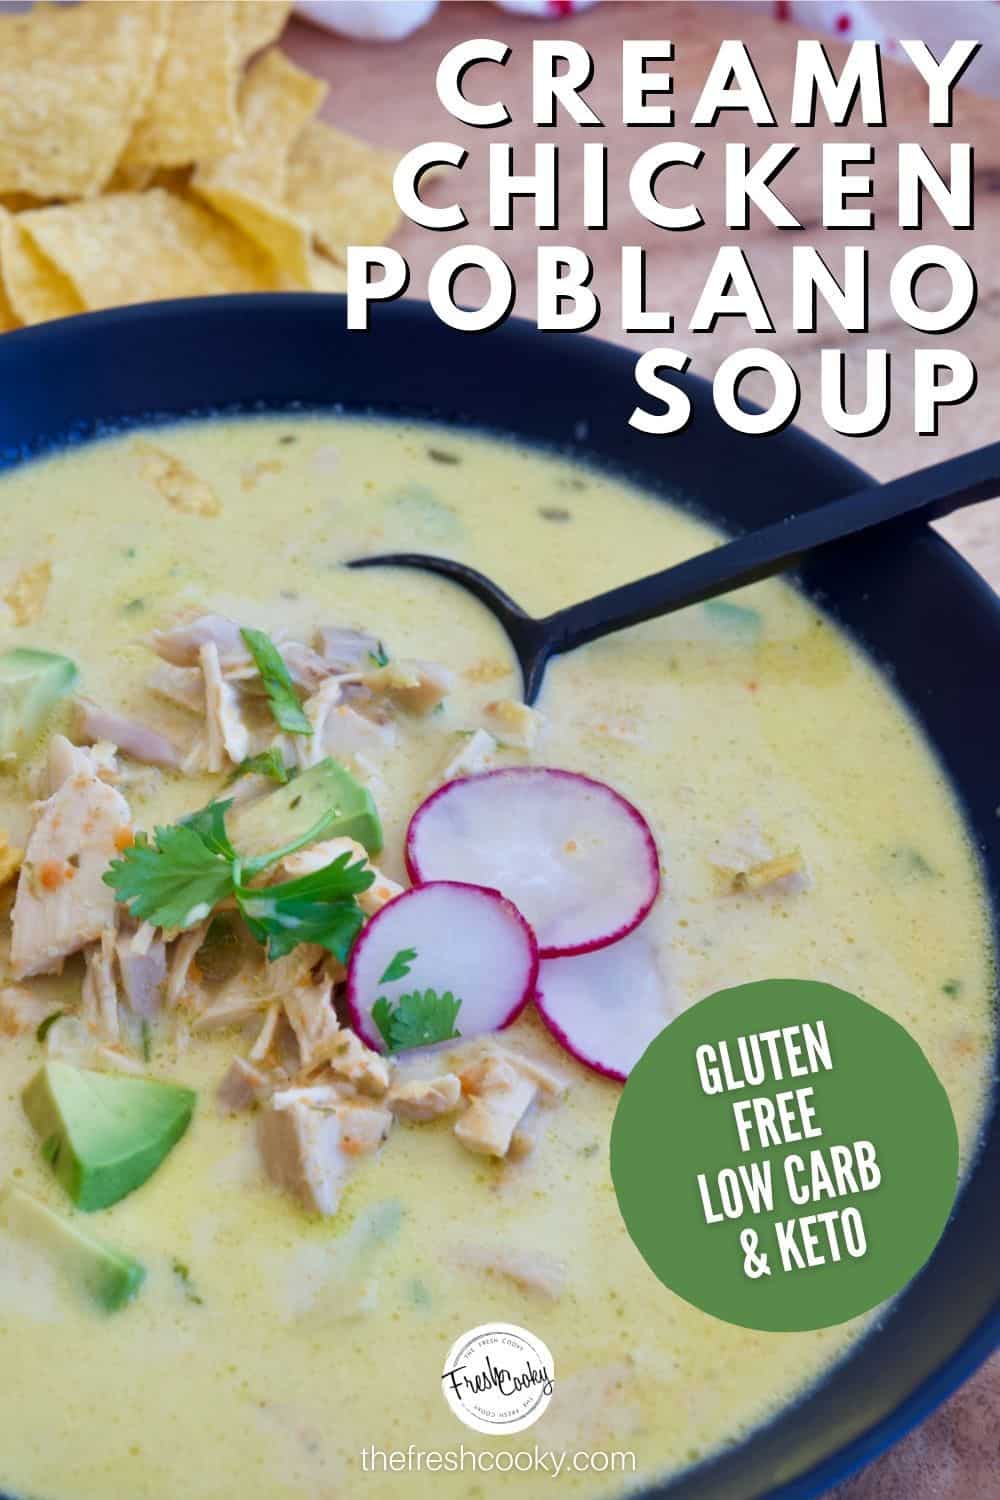 Pinterest Pin for Creamy Chicken Poblano Soup with call out that it's Gluten Free, Low carb and Keto. Image of bowl of creamy chicken soup in black bowl with black spoon, tortilla chips in background.